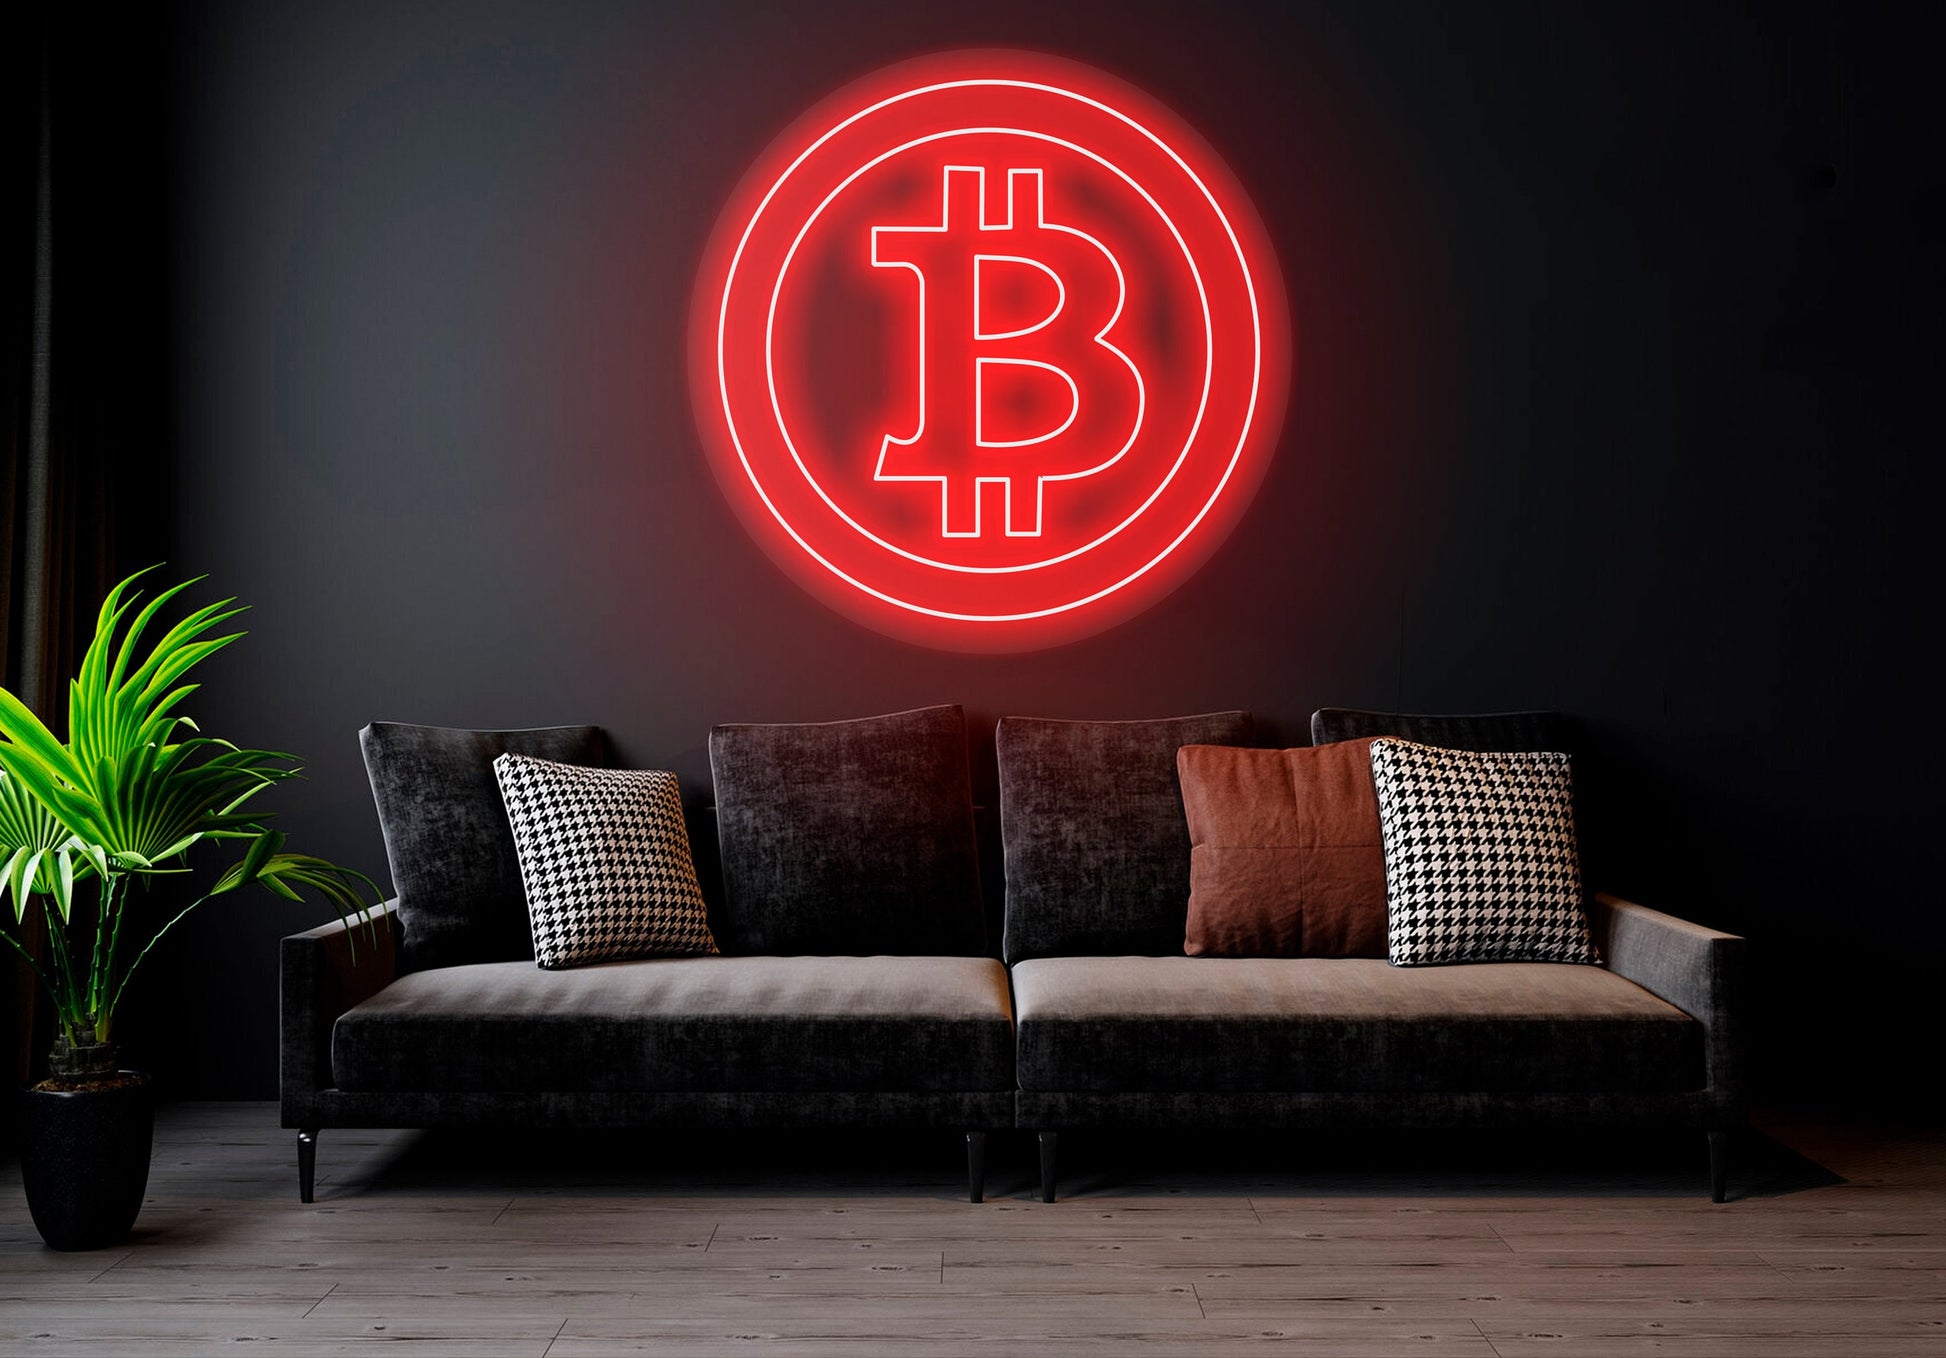 Bitcoin - LED Neon Sign, Bedroom neon sign, Crypto neon sign, Neon Lights, Crypto